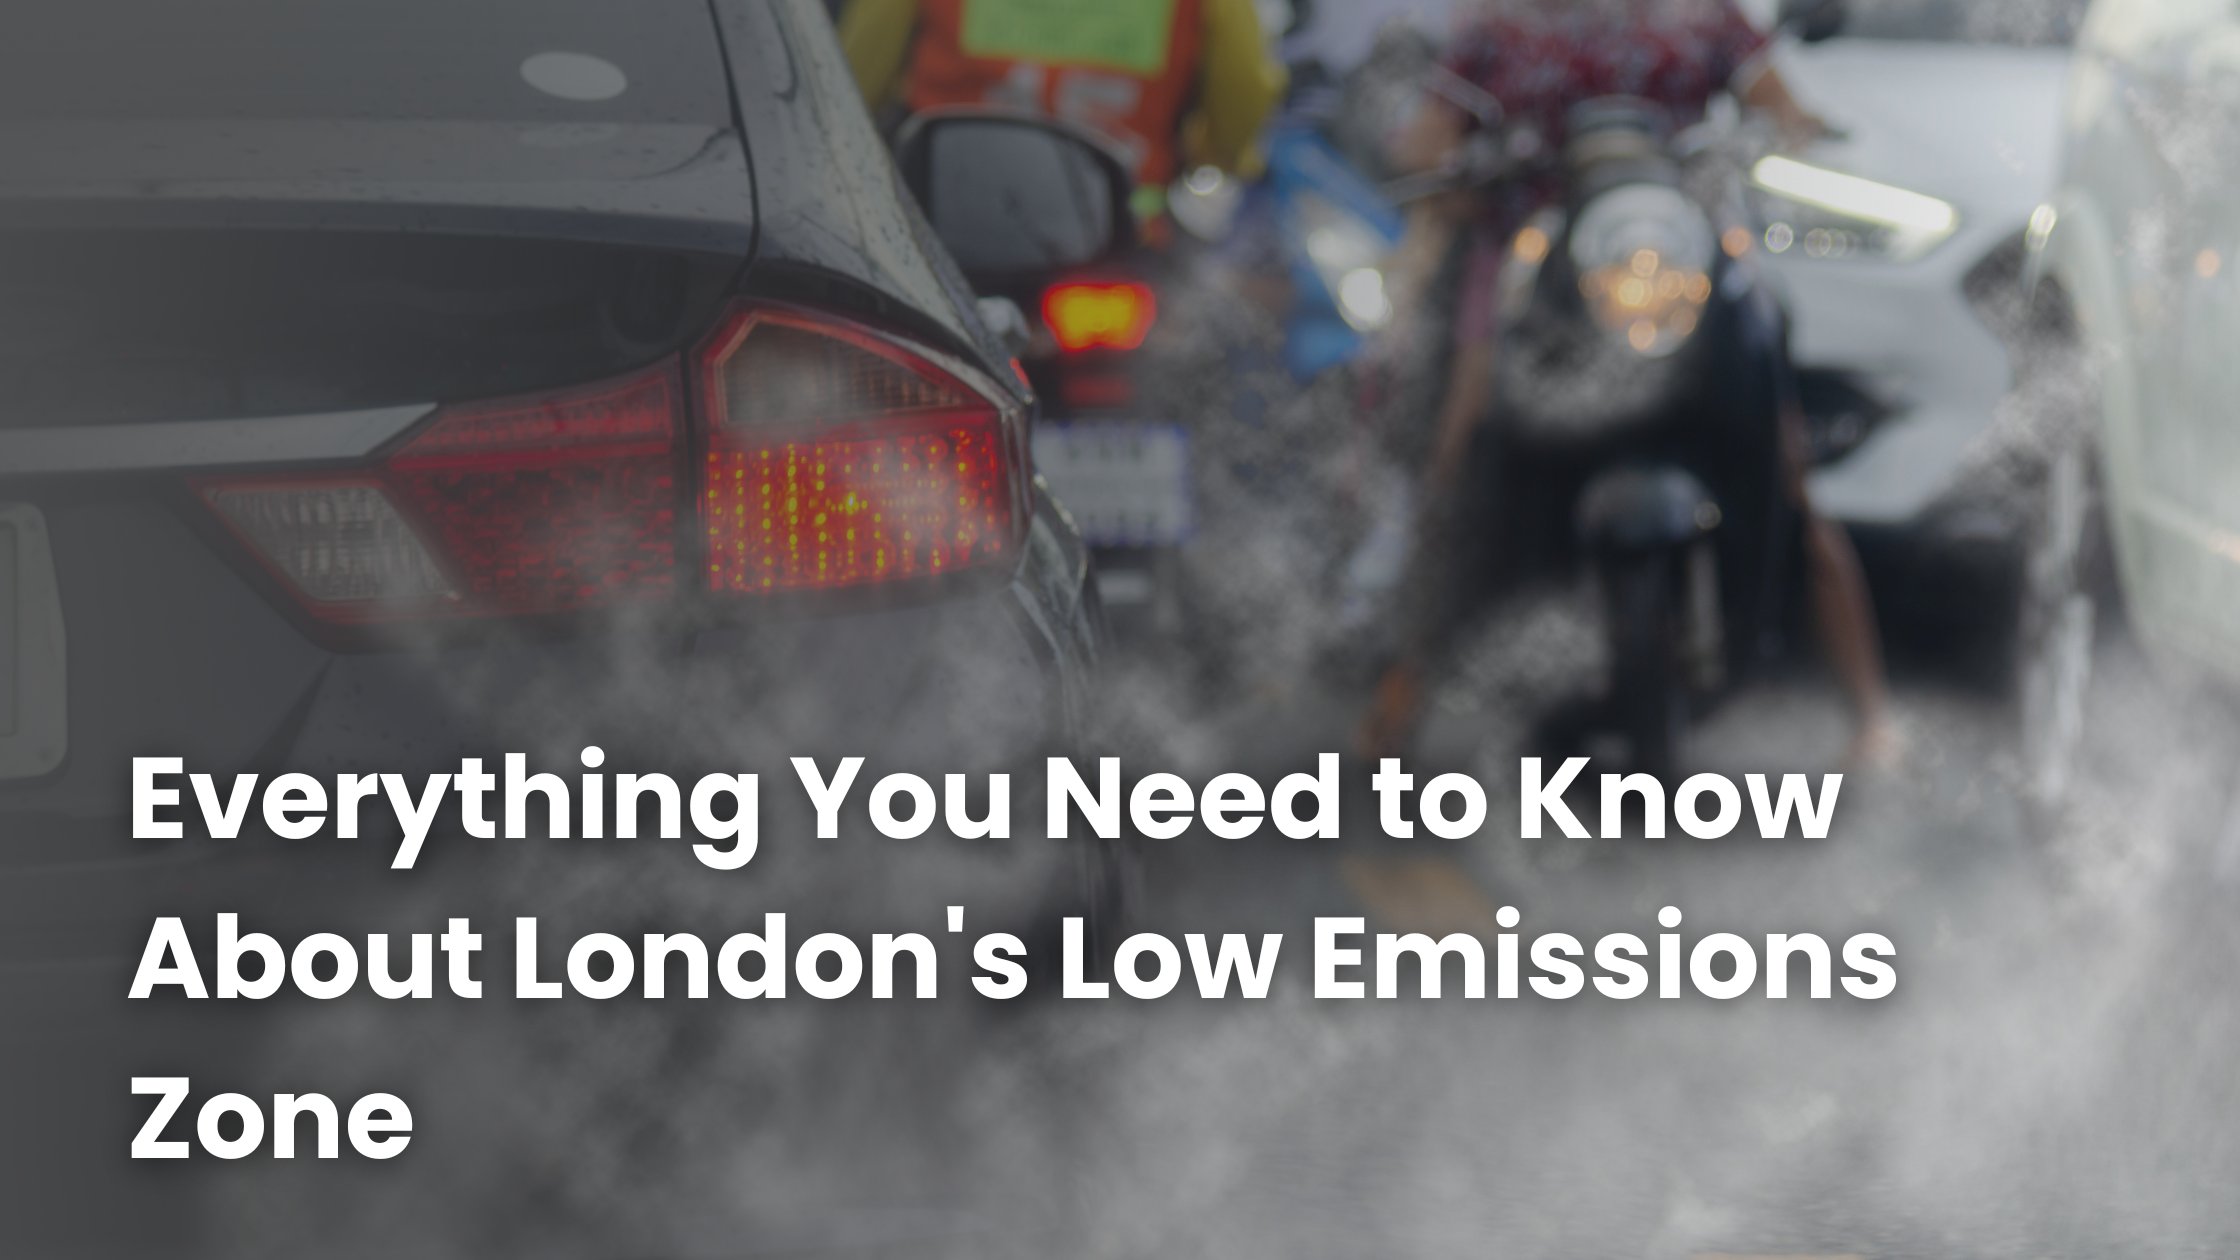 Everything You Need to Know About London's Low Emissions Zone